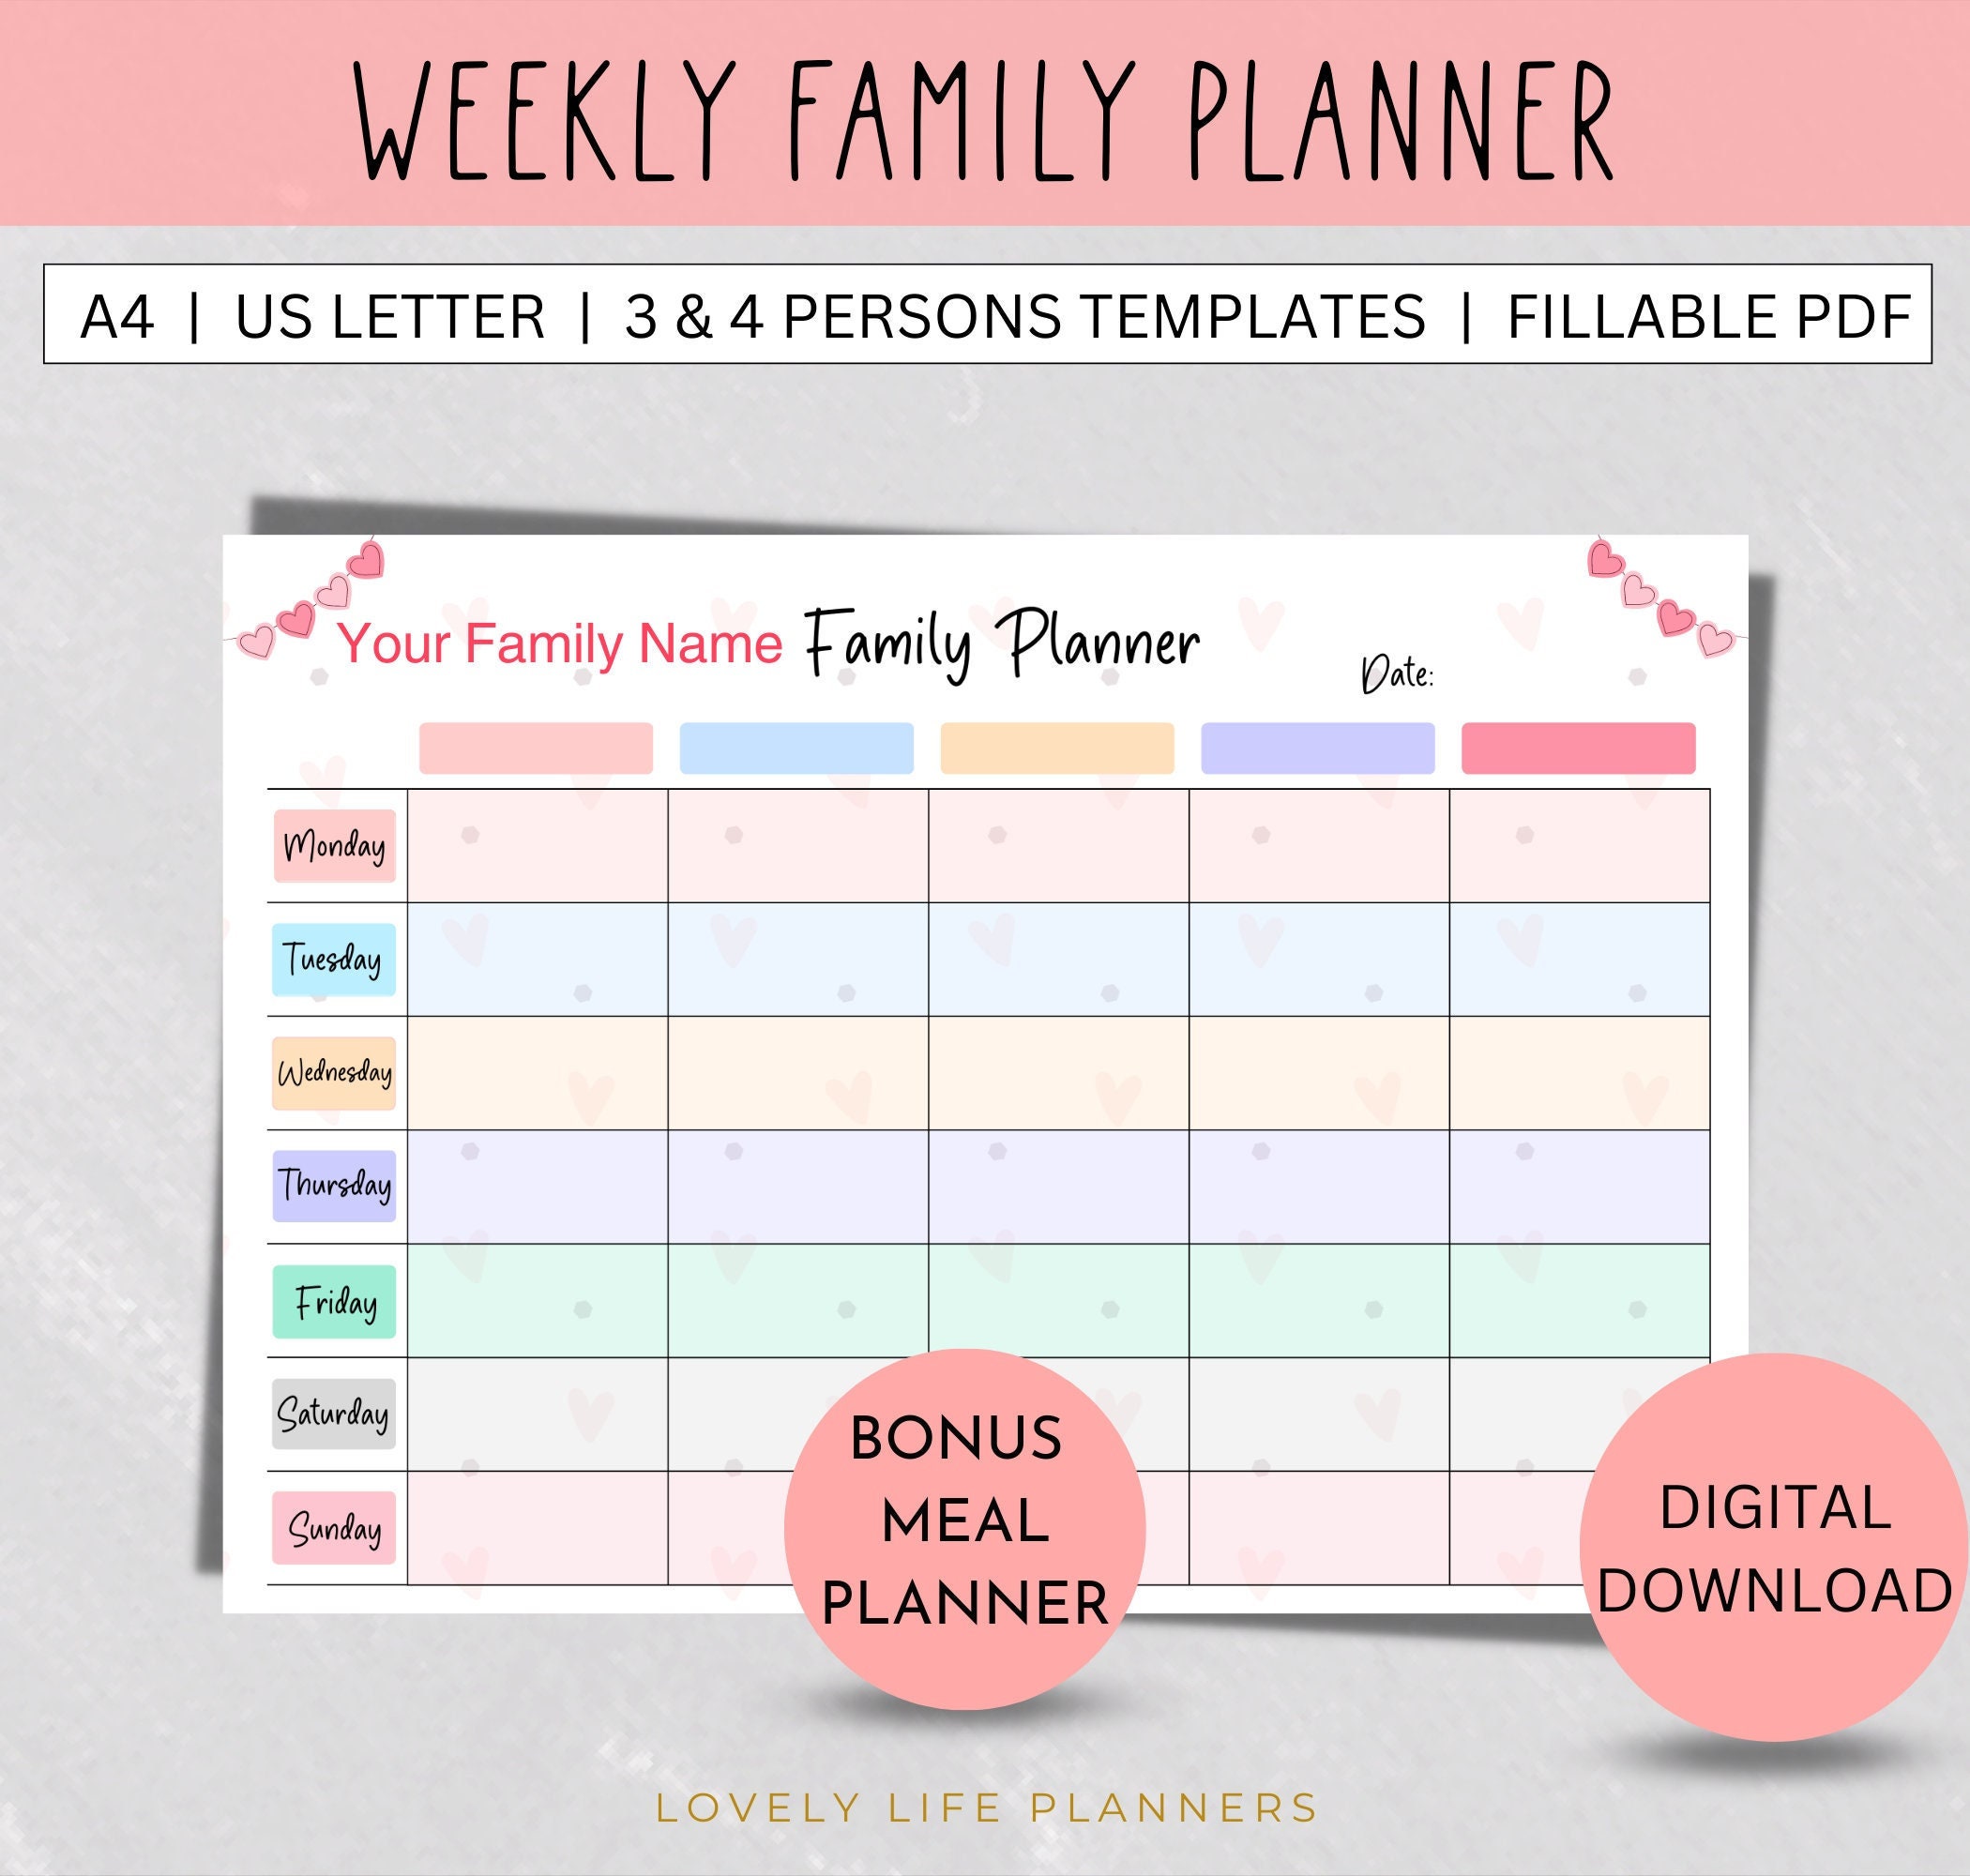 Weekly Family Planner Affiche - Planner semainier familial